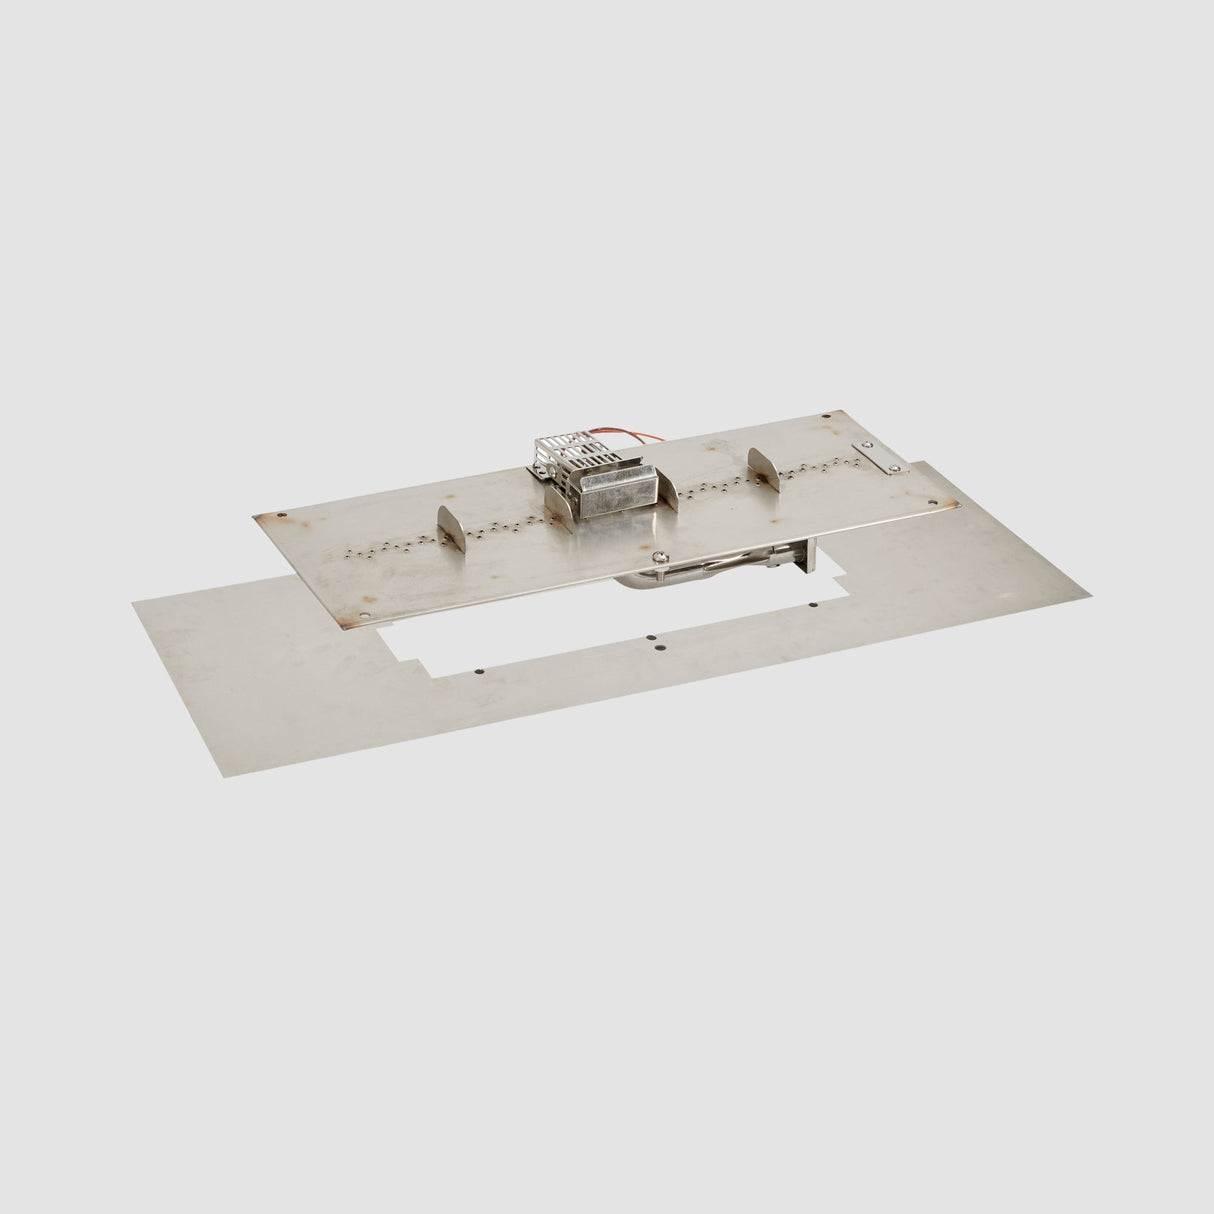 Crystal Fire Plus Linear Gas Burner Insert and Plate Kit